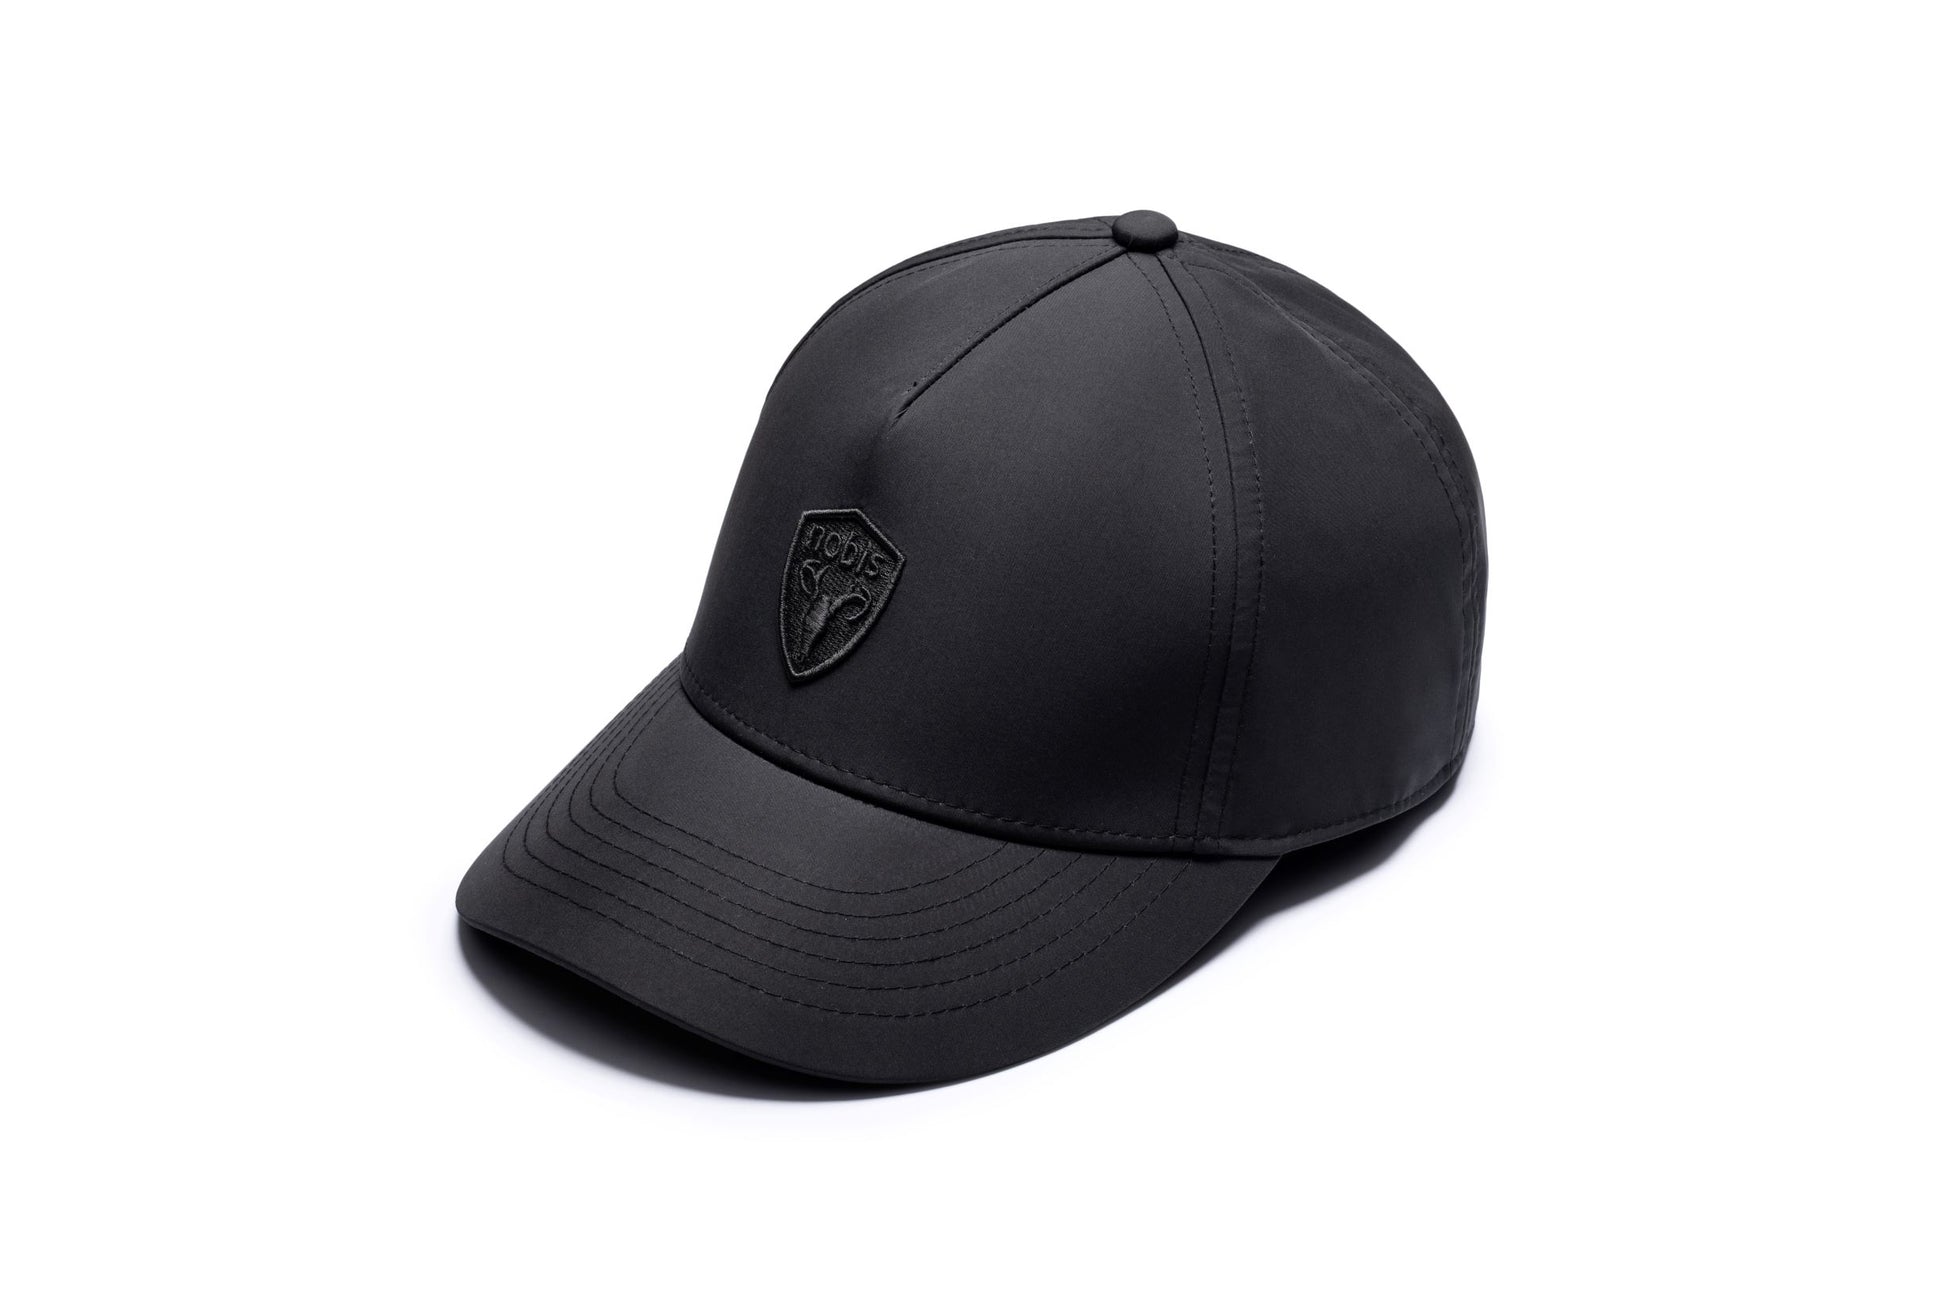 Satine Adjustable Cap in 5-panel construction, mid height crown, curved peak brim, and adjustable strap closure, in Black